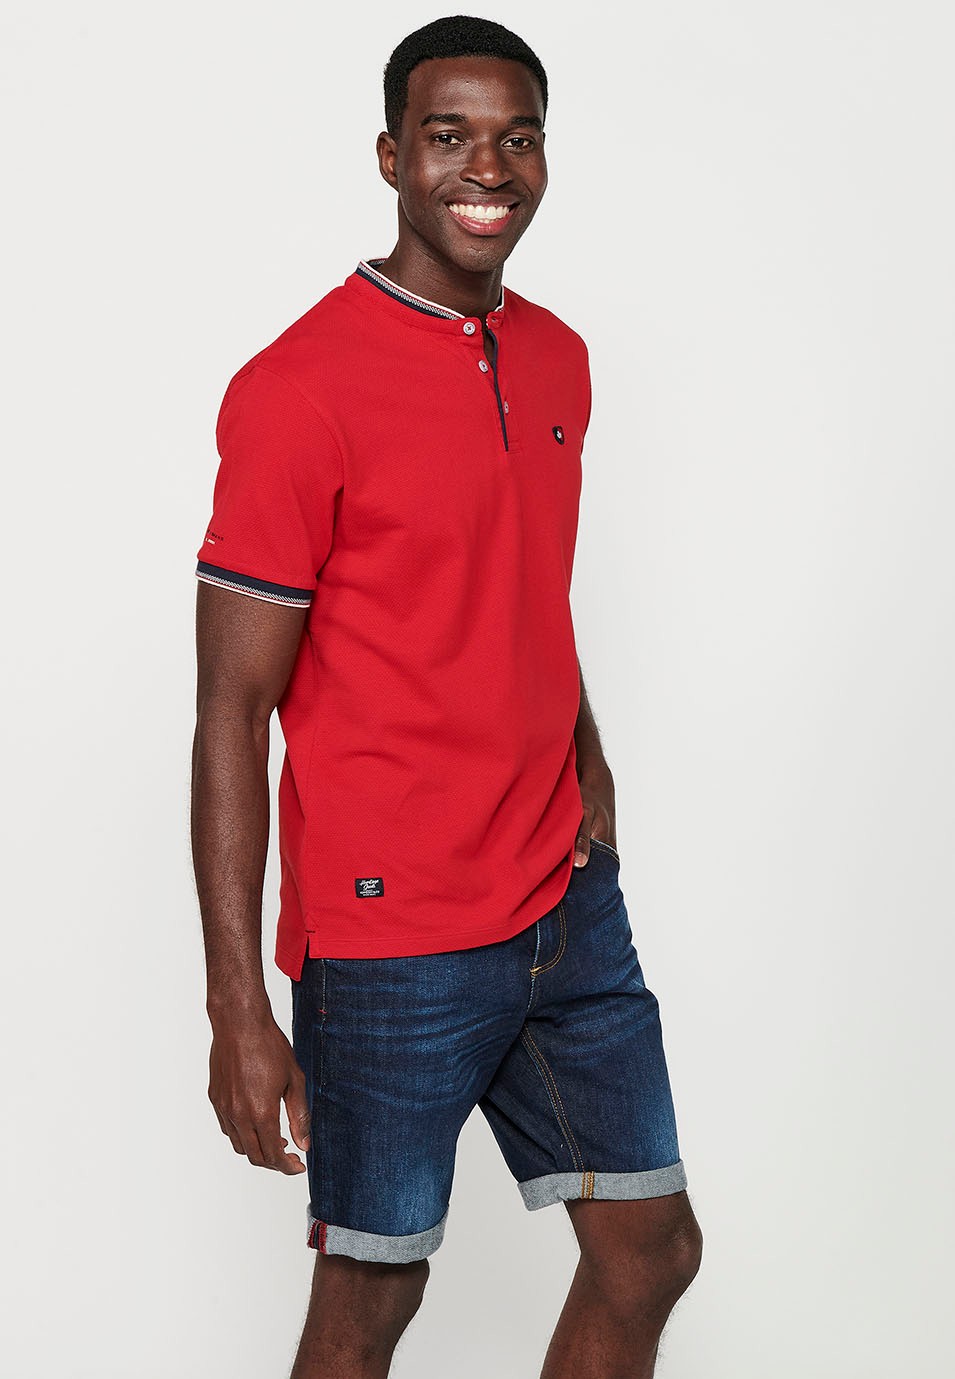 Short-sleeved cotton polo shirt finished in rib with a round neck with buttoned opening and textured with side slits in Red for Men 6